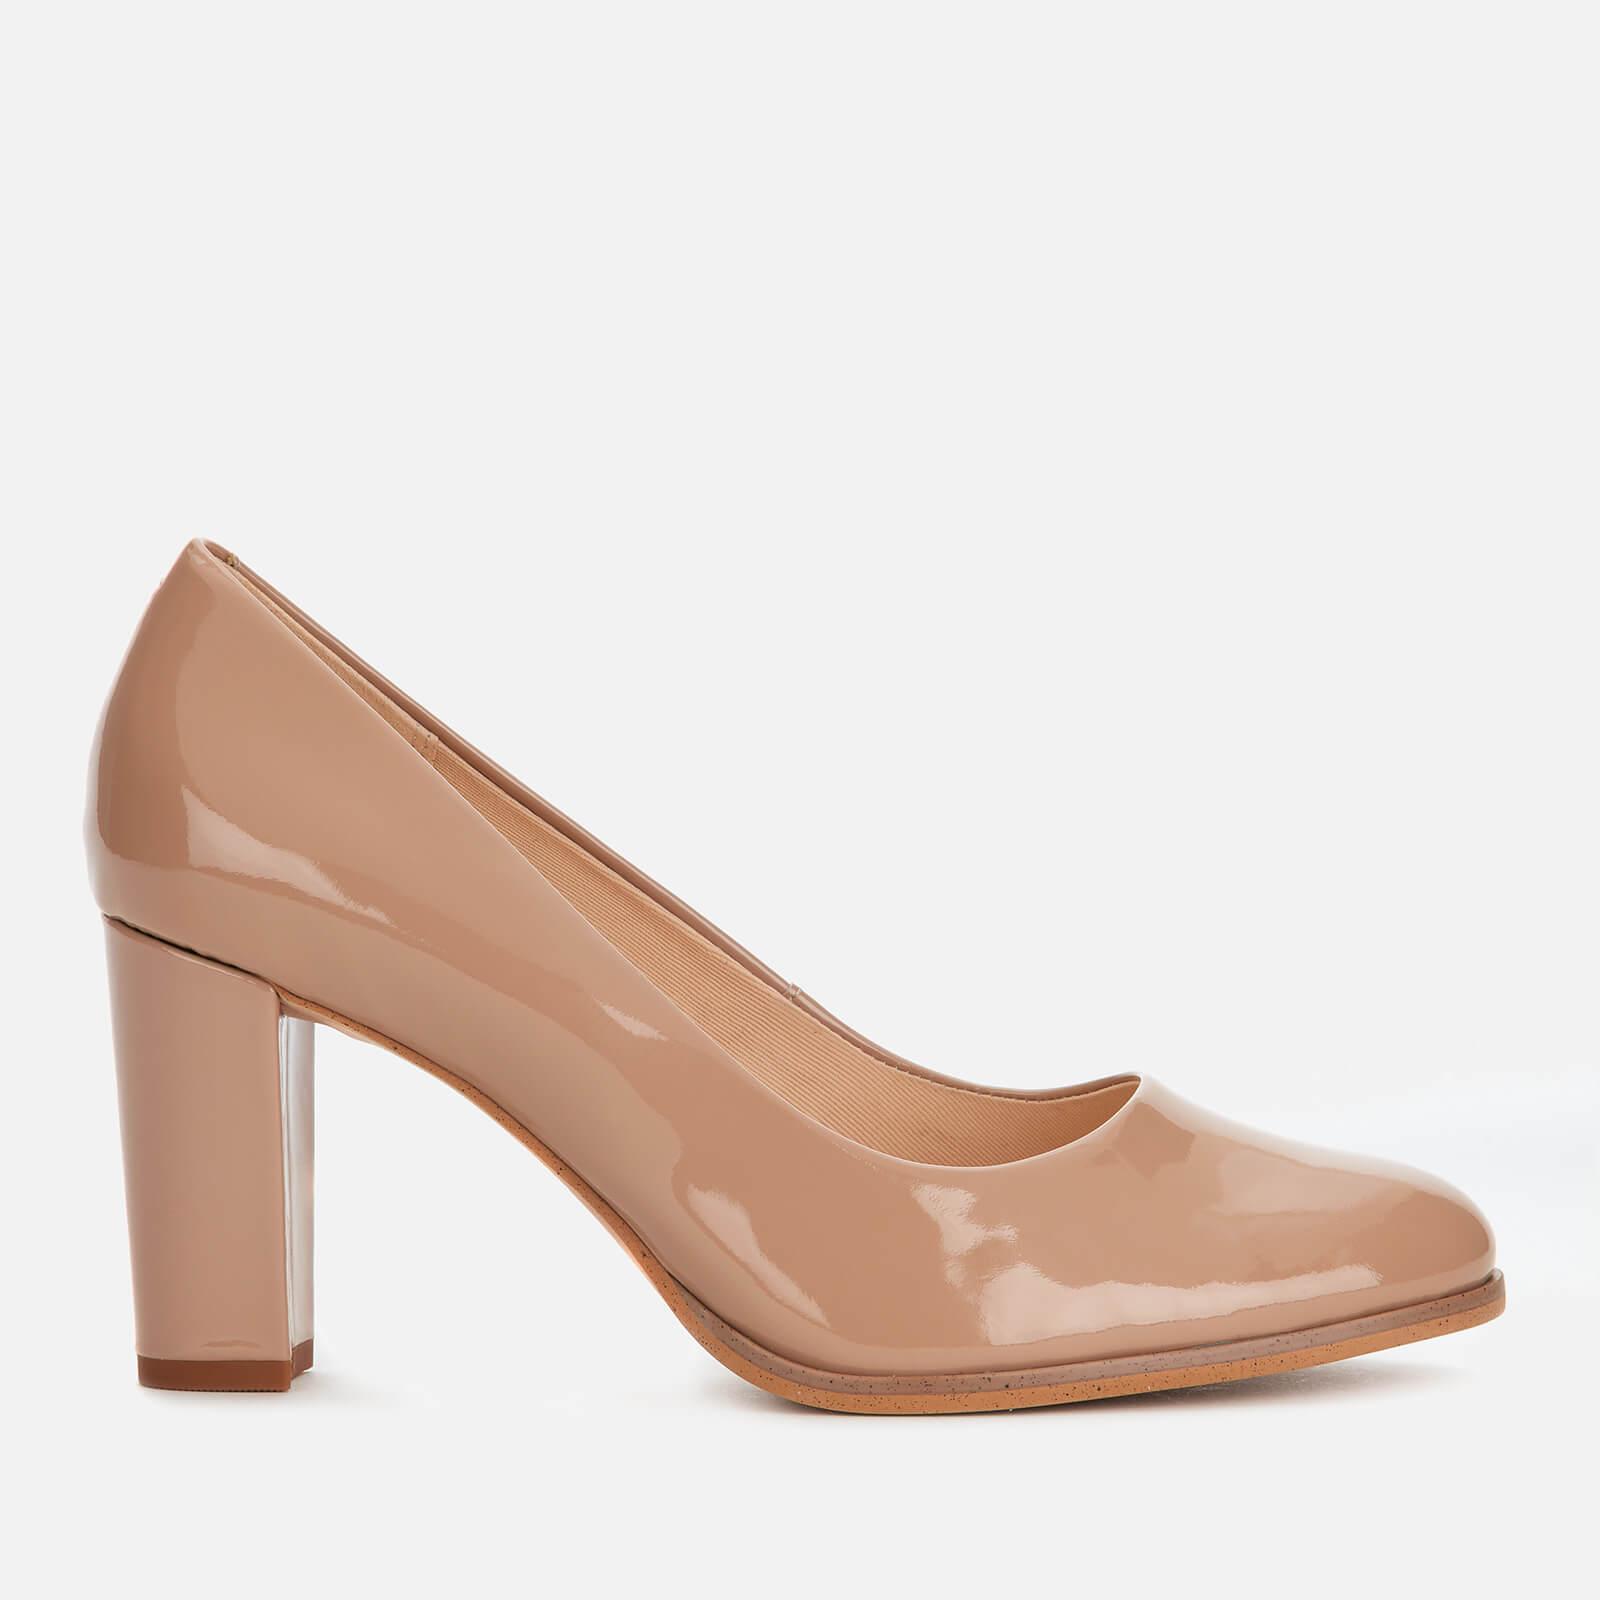 Clarks Kaylin Cara Patent Court Shoes in Natural | Lyst